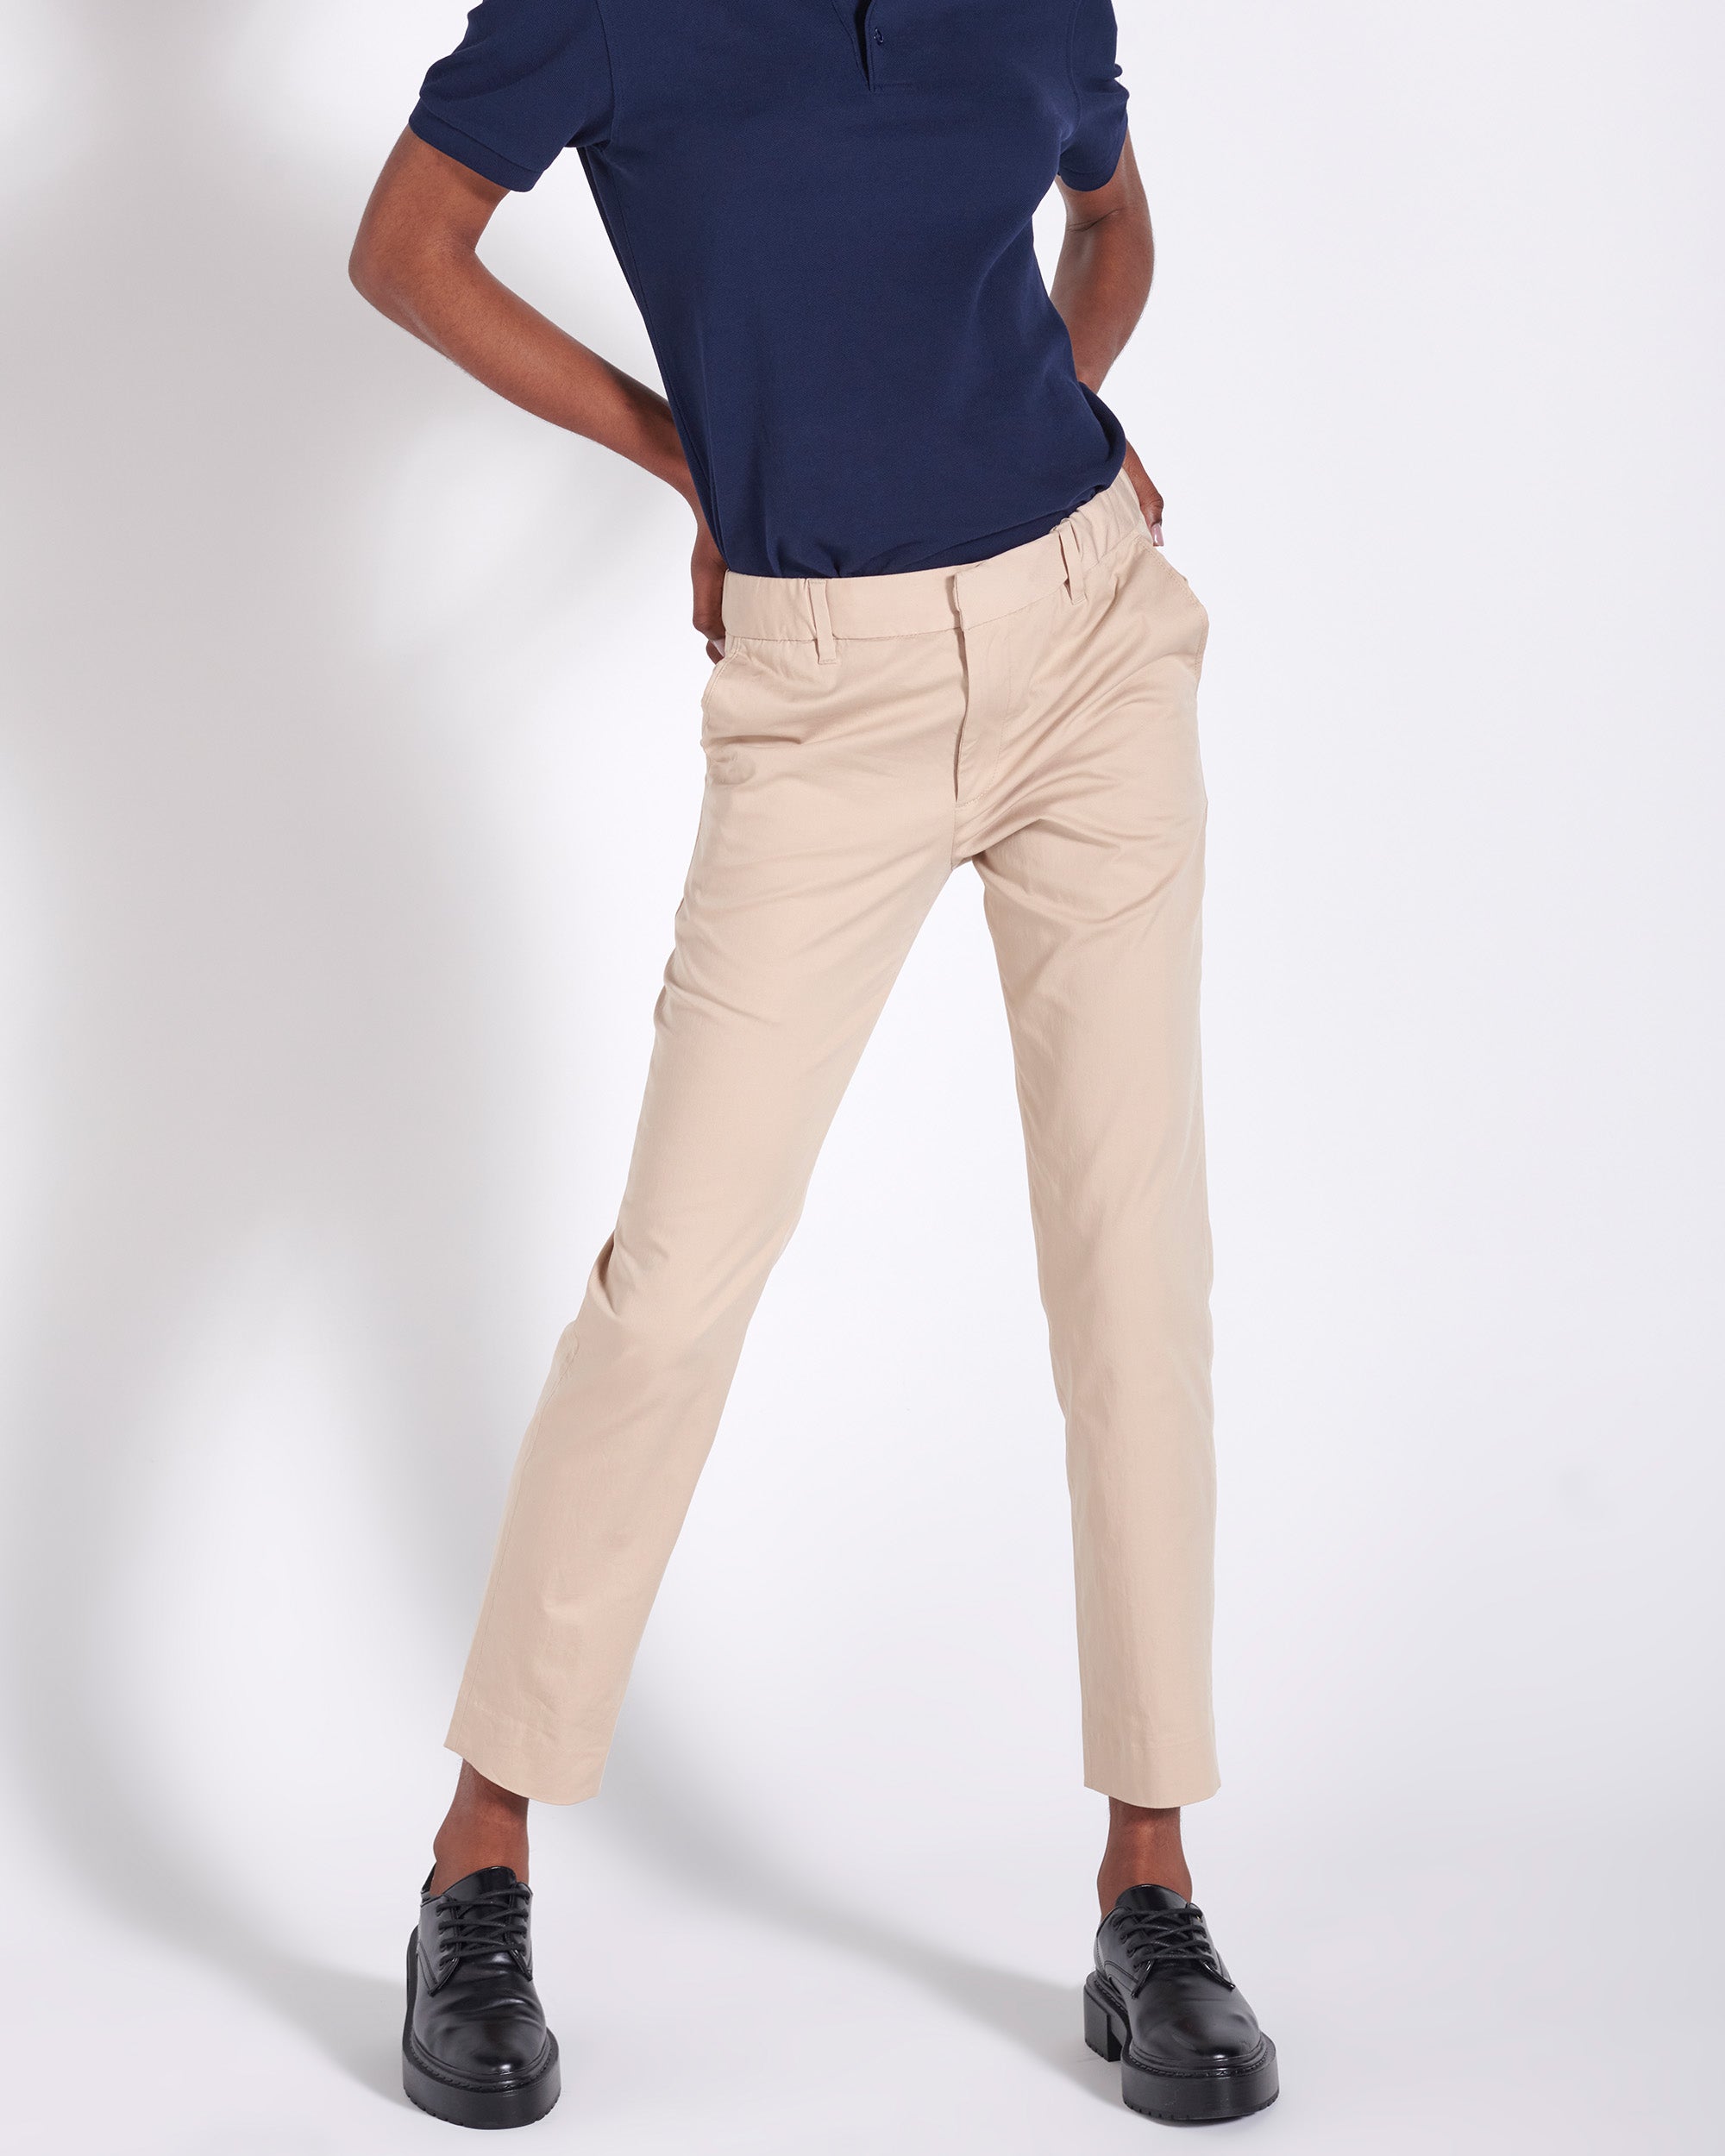 The Beige Chinos for Women | Slim Fit, Stretch Cotton